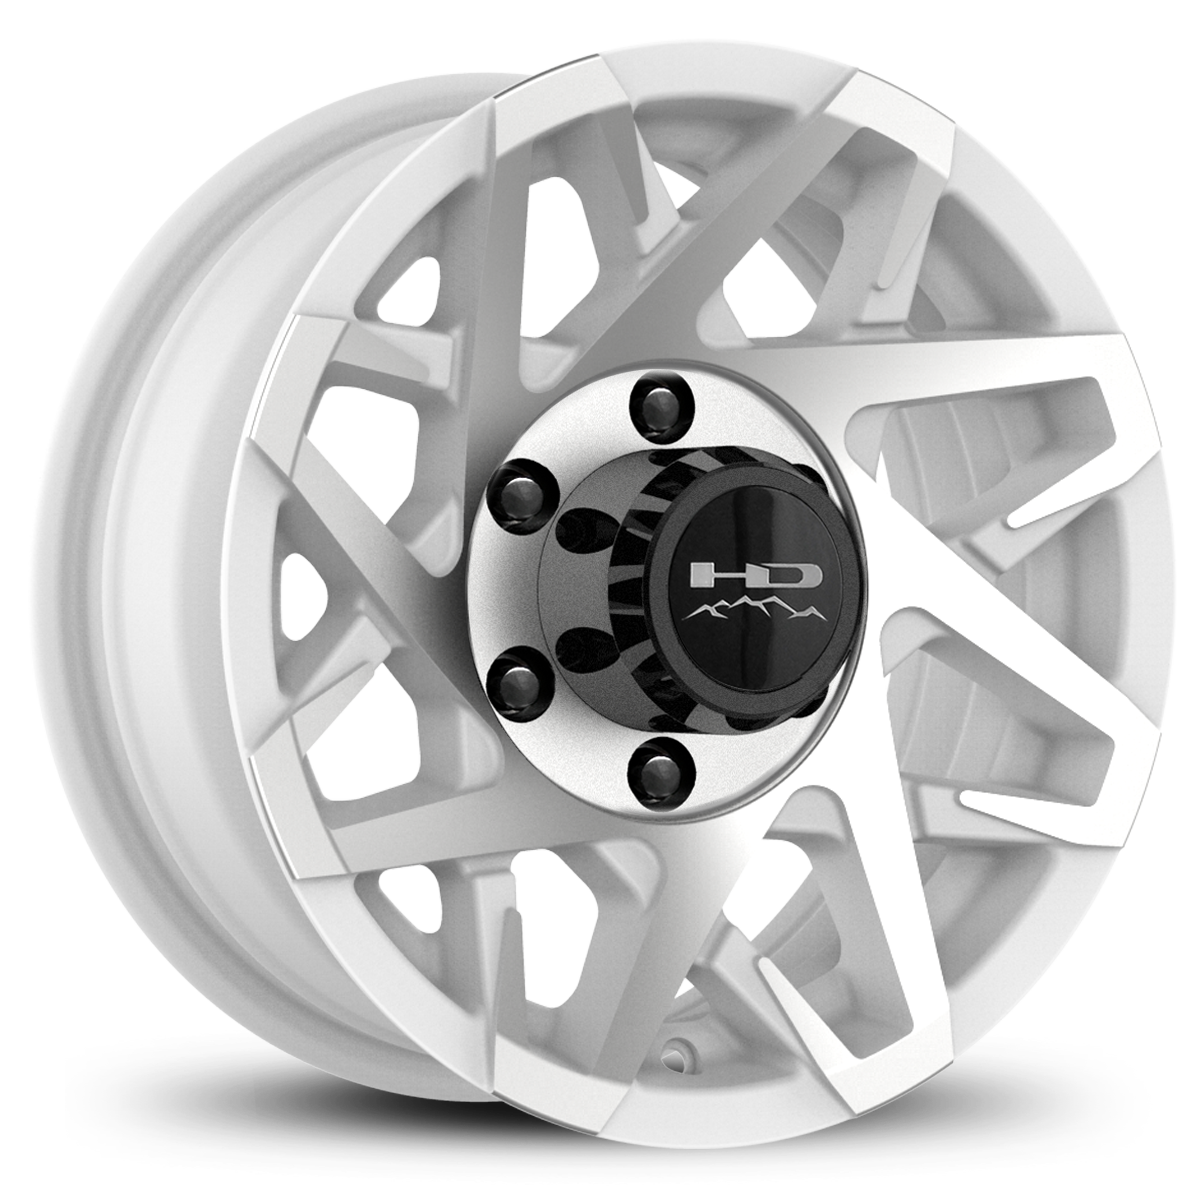 HD Off-Road Canyon Custom Trailer Wheel Rims in 15x6.0  15x6 Gloss White Machined Face with Center Cap & Logo fits 6x5.50 / 6x139.7 Axle Boat, Car, RV, Travel, Concession, Horse, Utility, Lawn & Garden, & Landscaping.